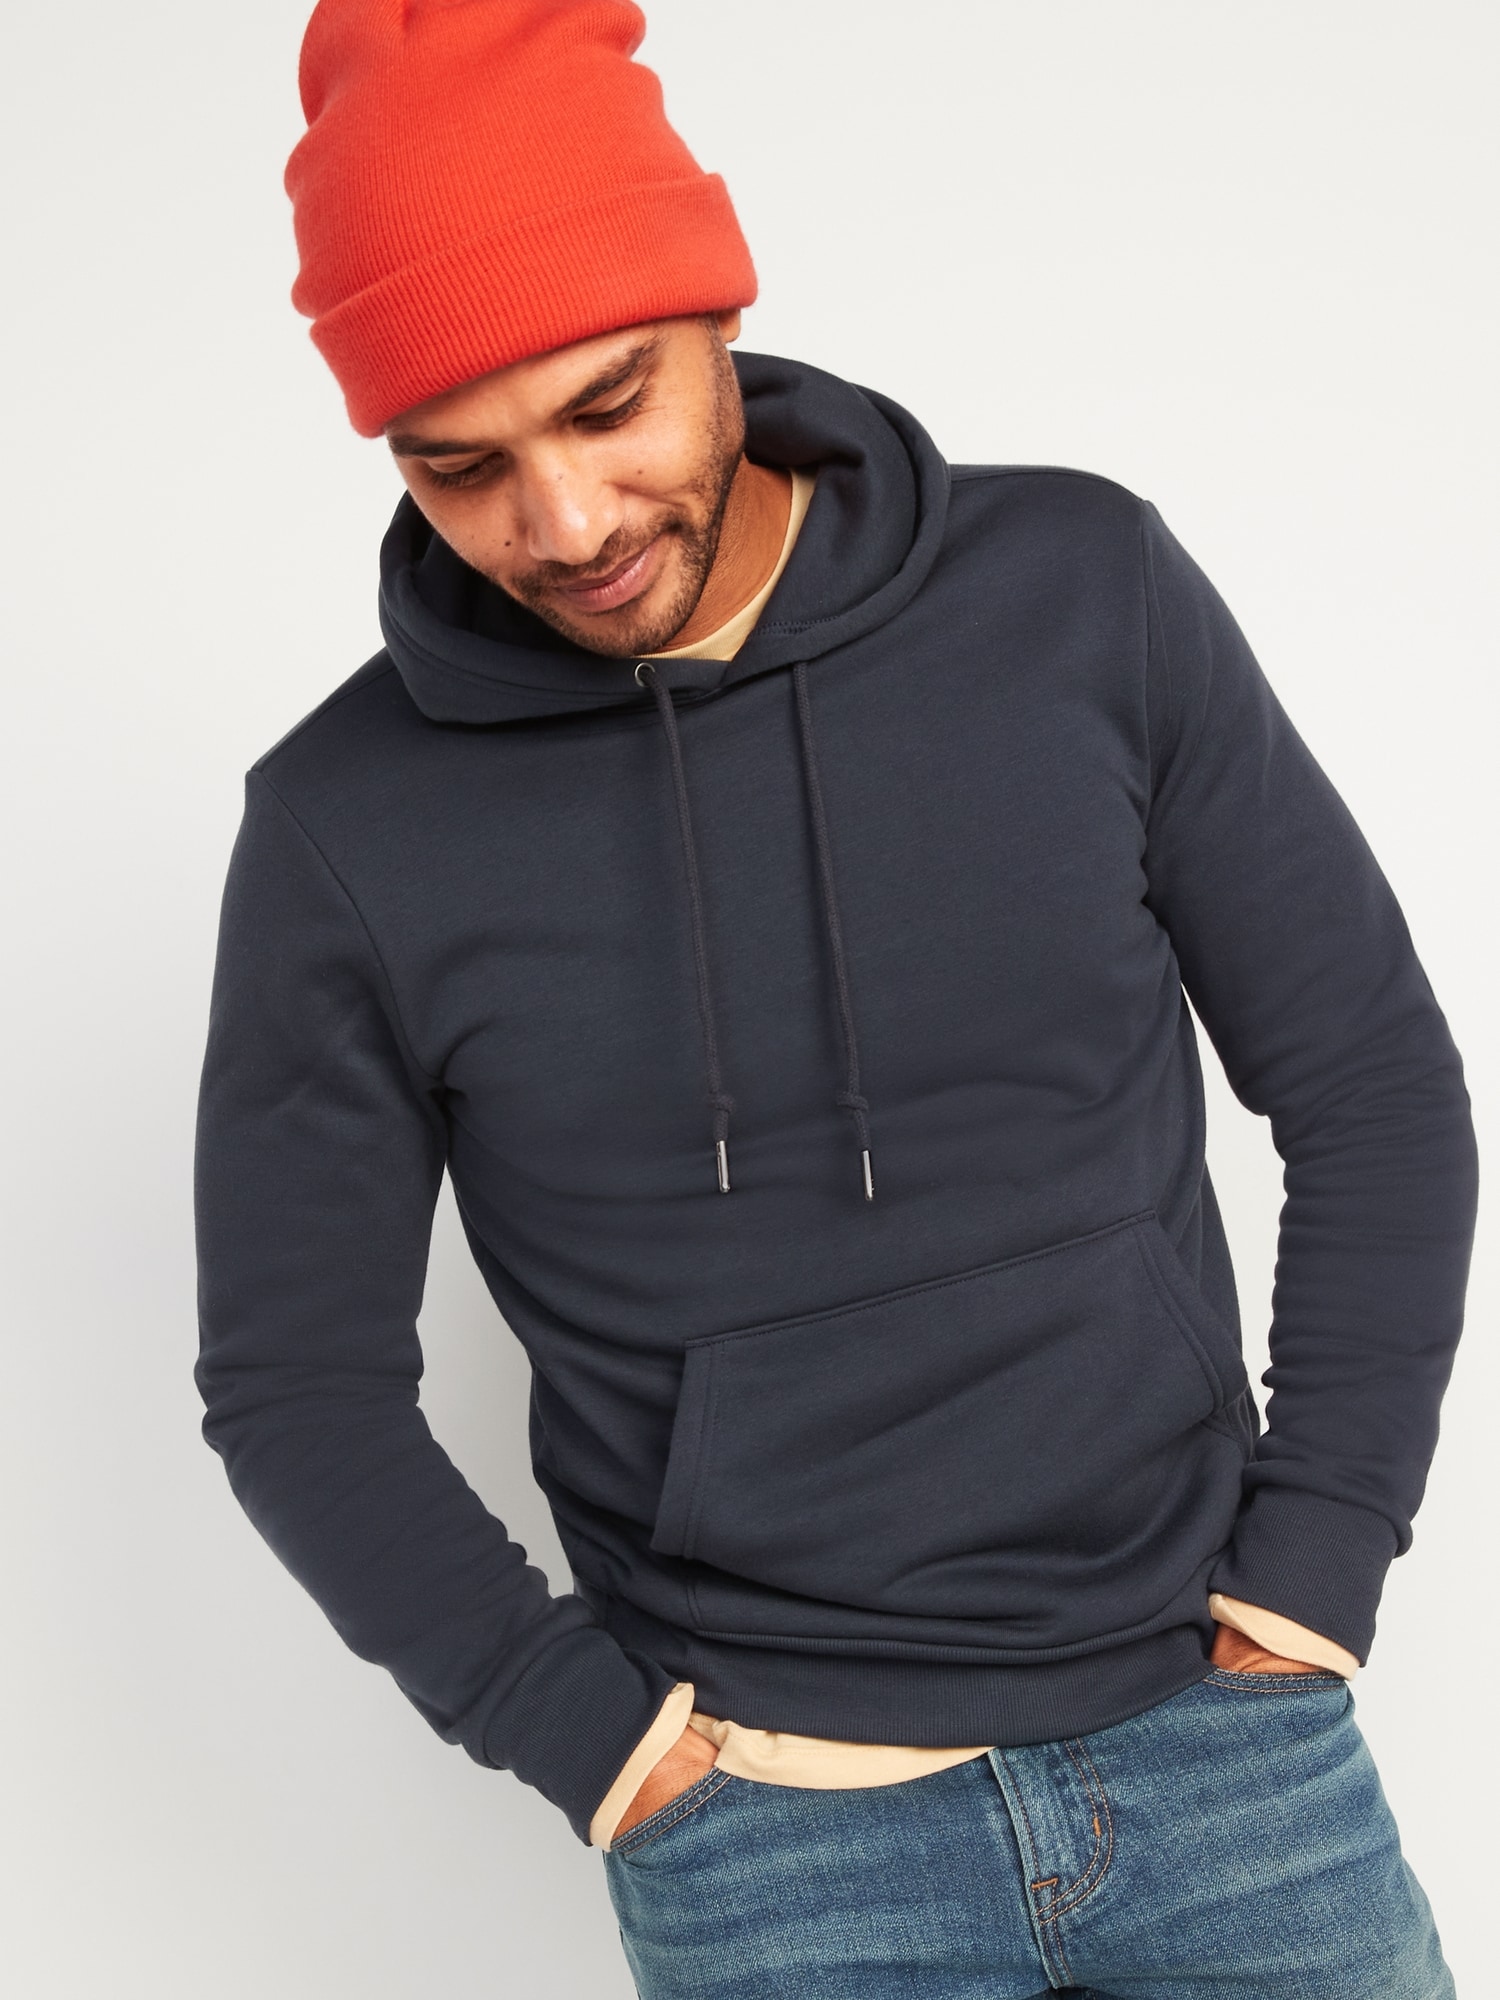 Hoodie Navy for Men Pullover Old | Classic